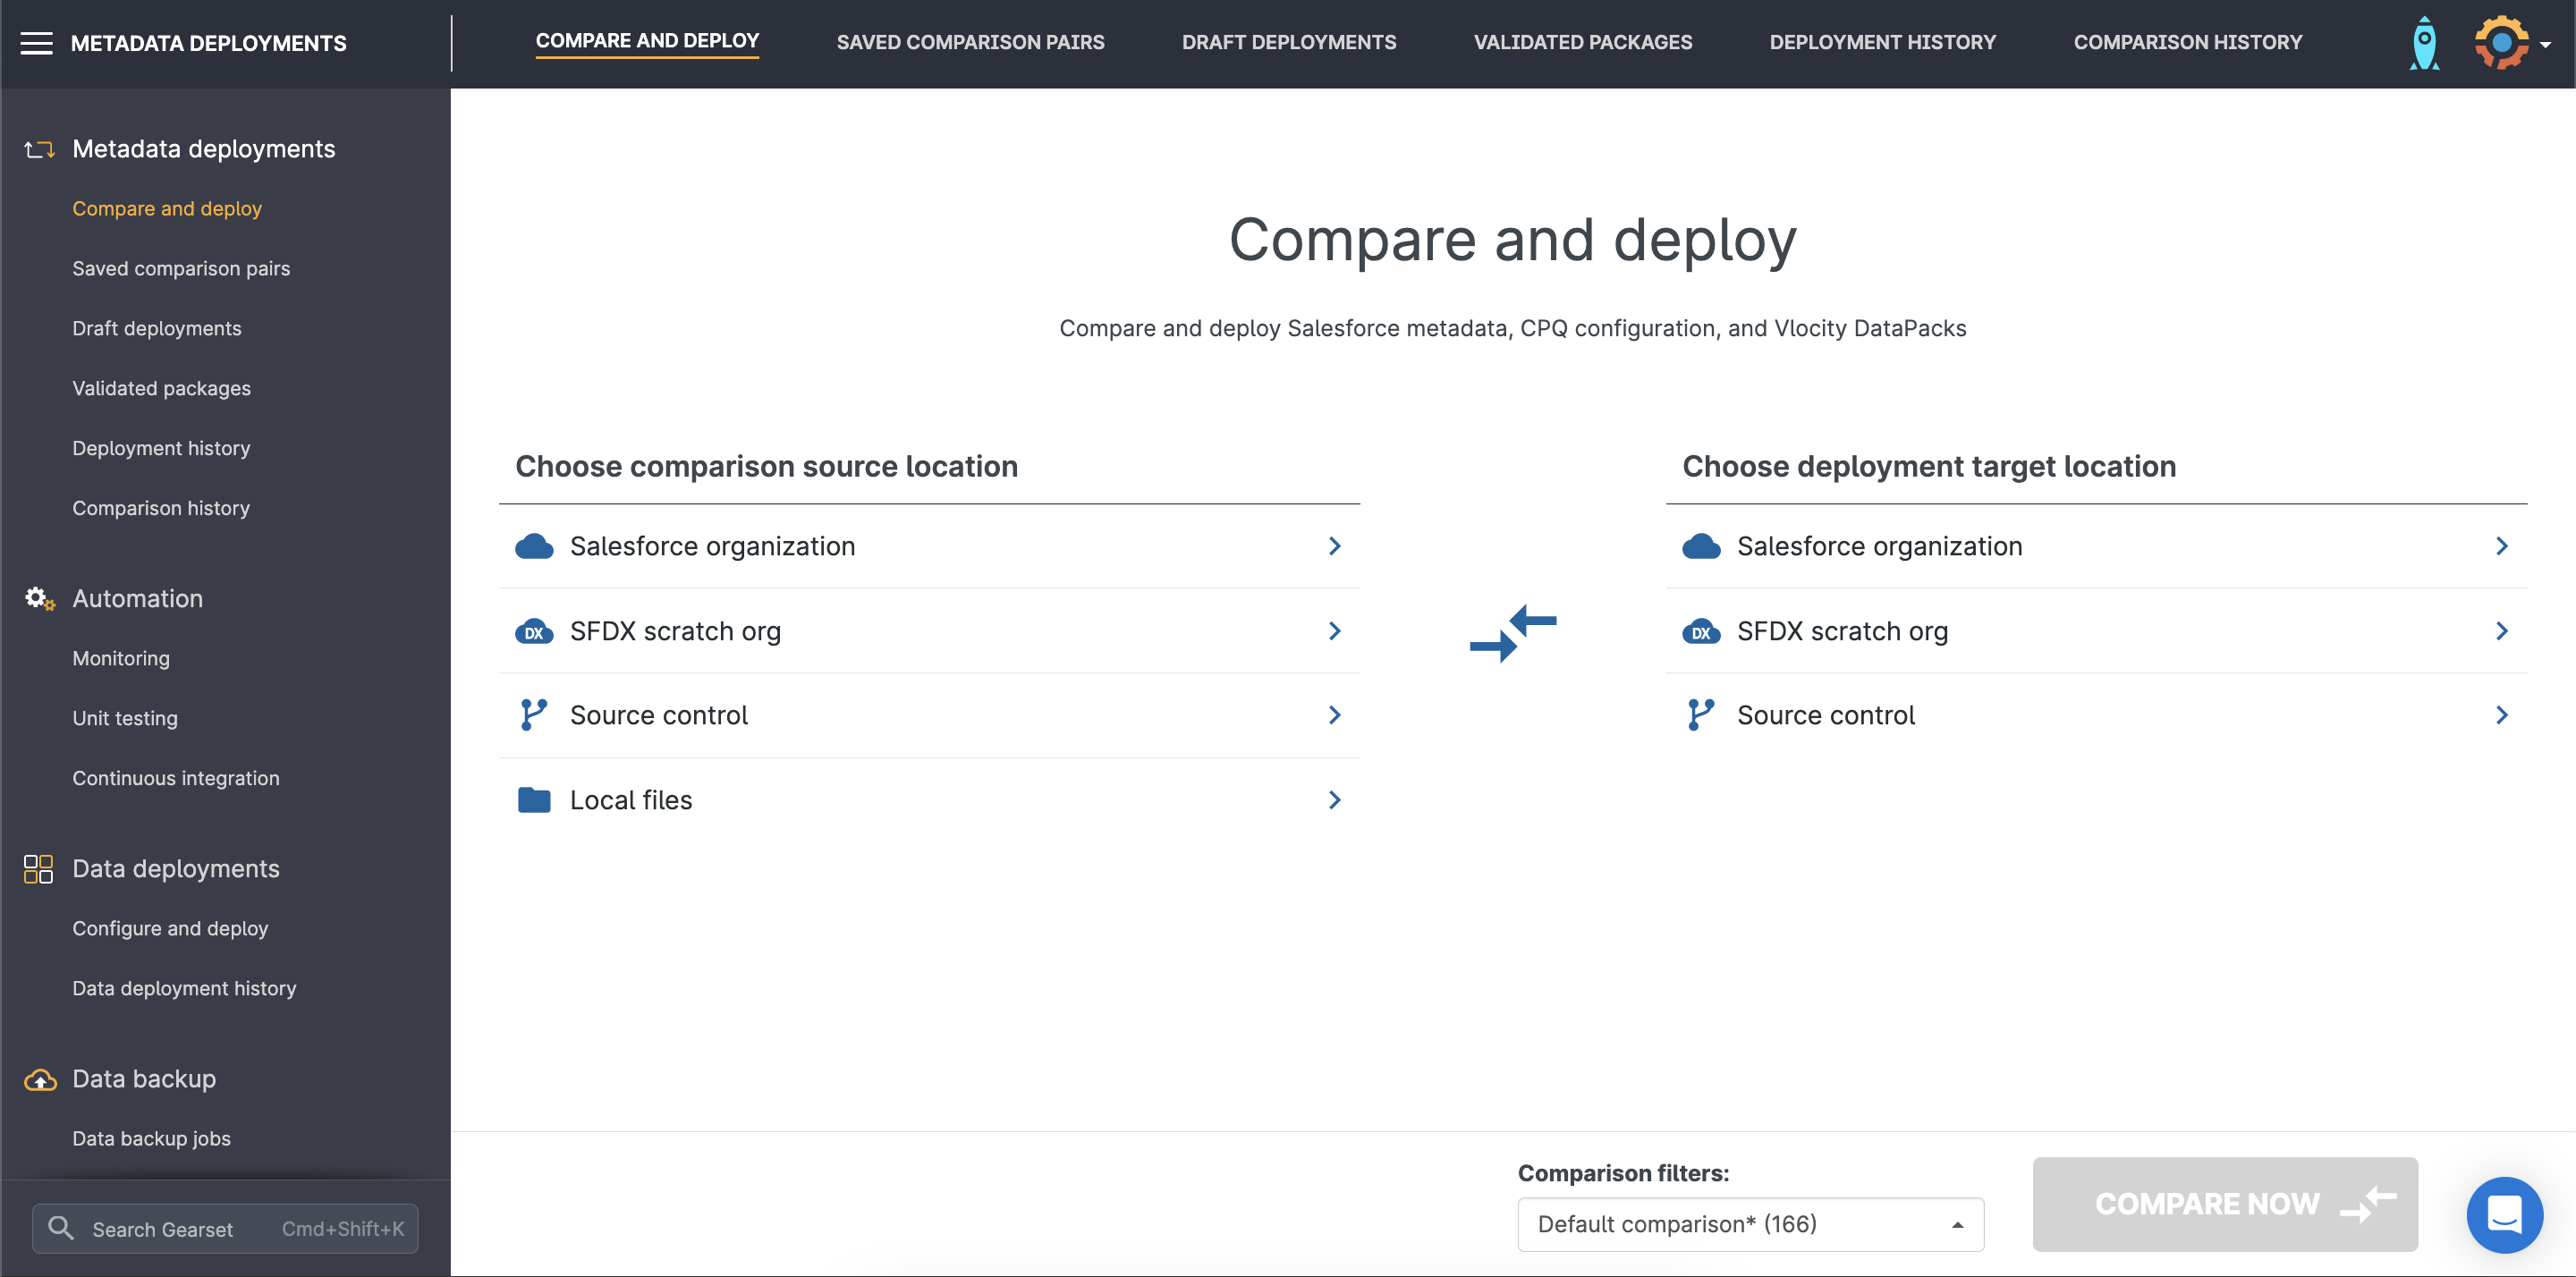 Gearset screenshot: Compare and deploy page showing source control